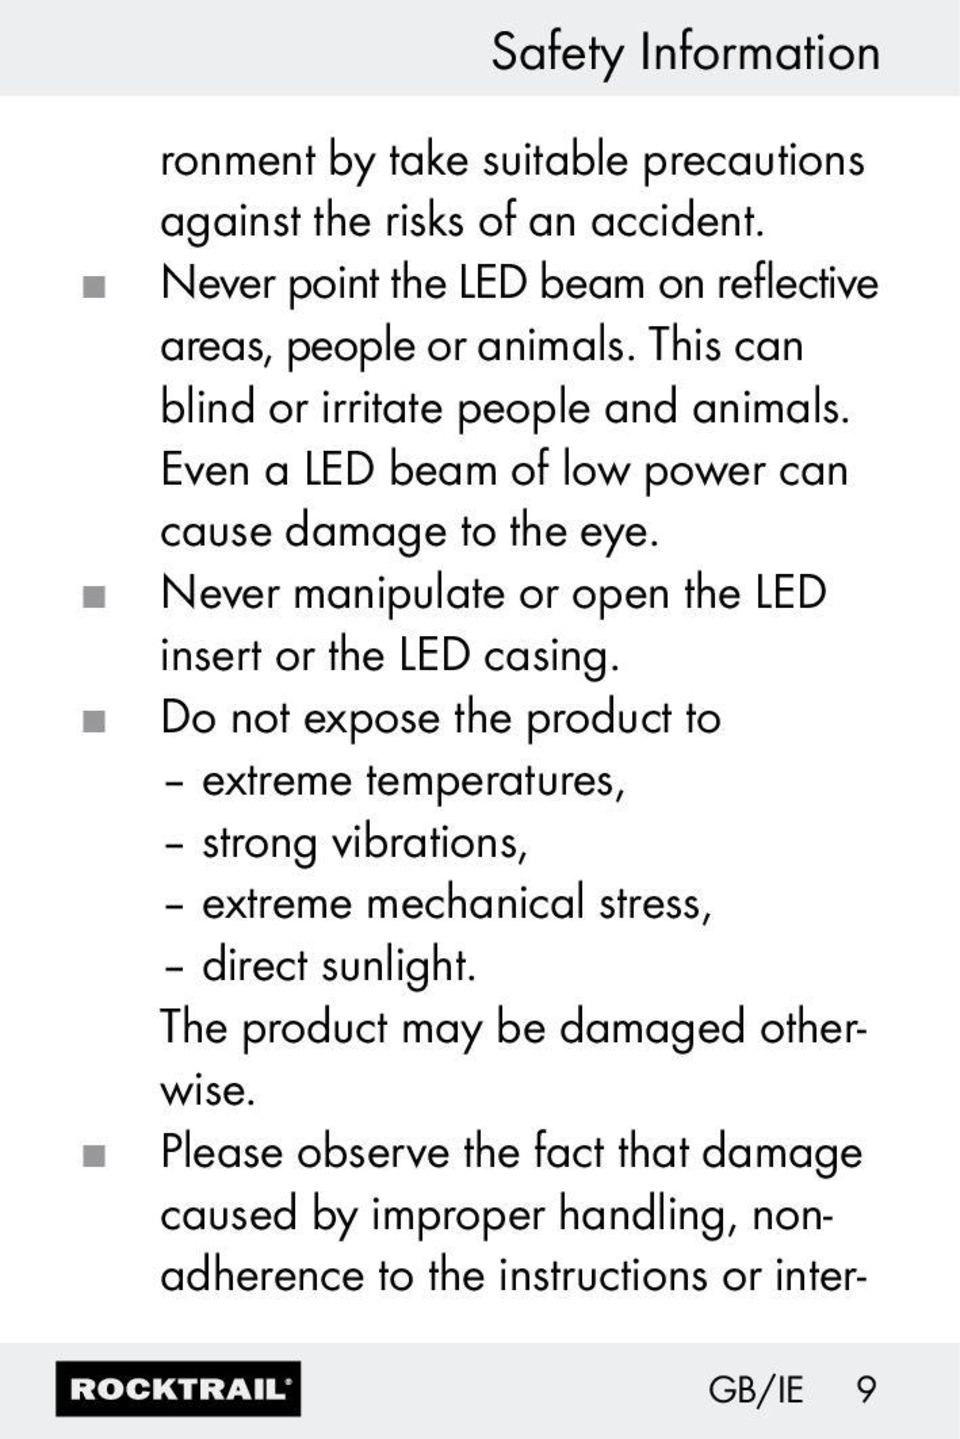 Even a LED beam of low power can cause damage to the eye. Never manipulate or open the LED insert or the LED casing.